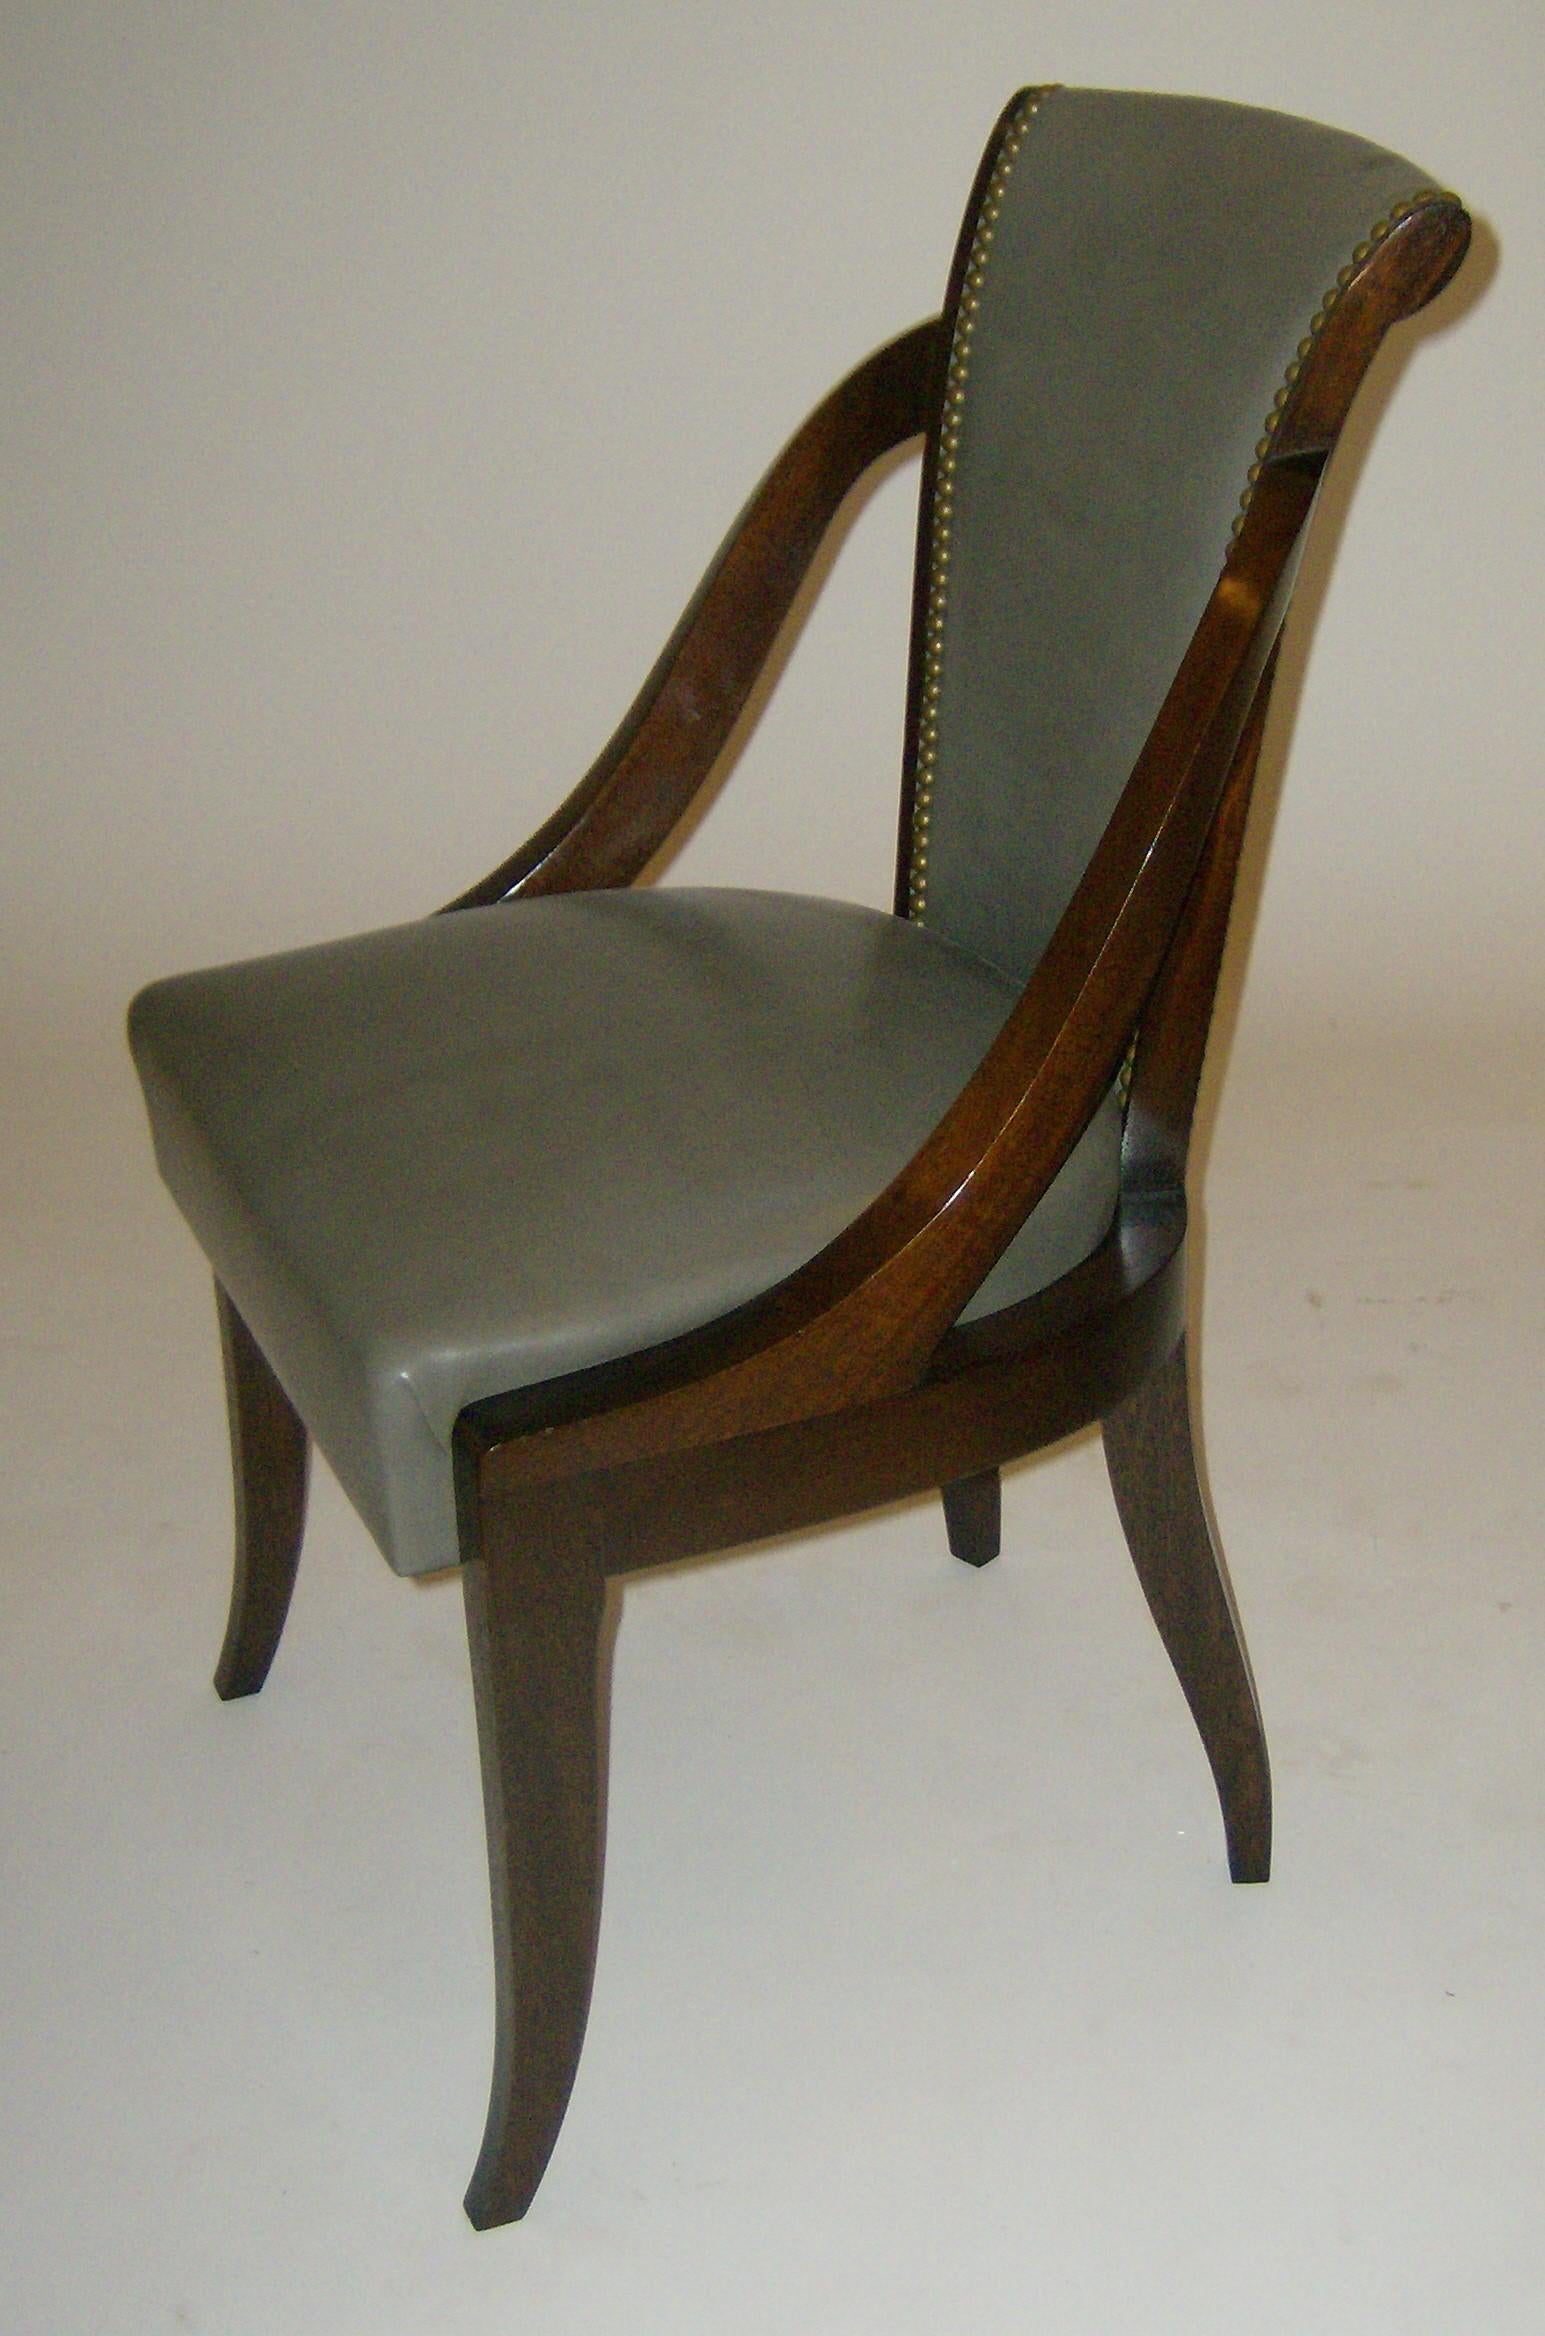 Polished Organic Deco Dining Chair in Solid Walnut and Upholstered in Fabric or Leather 